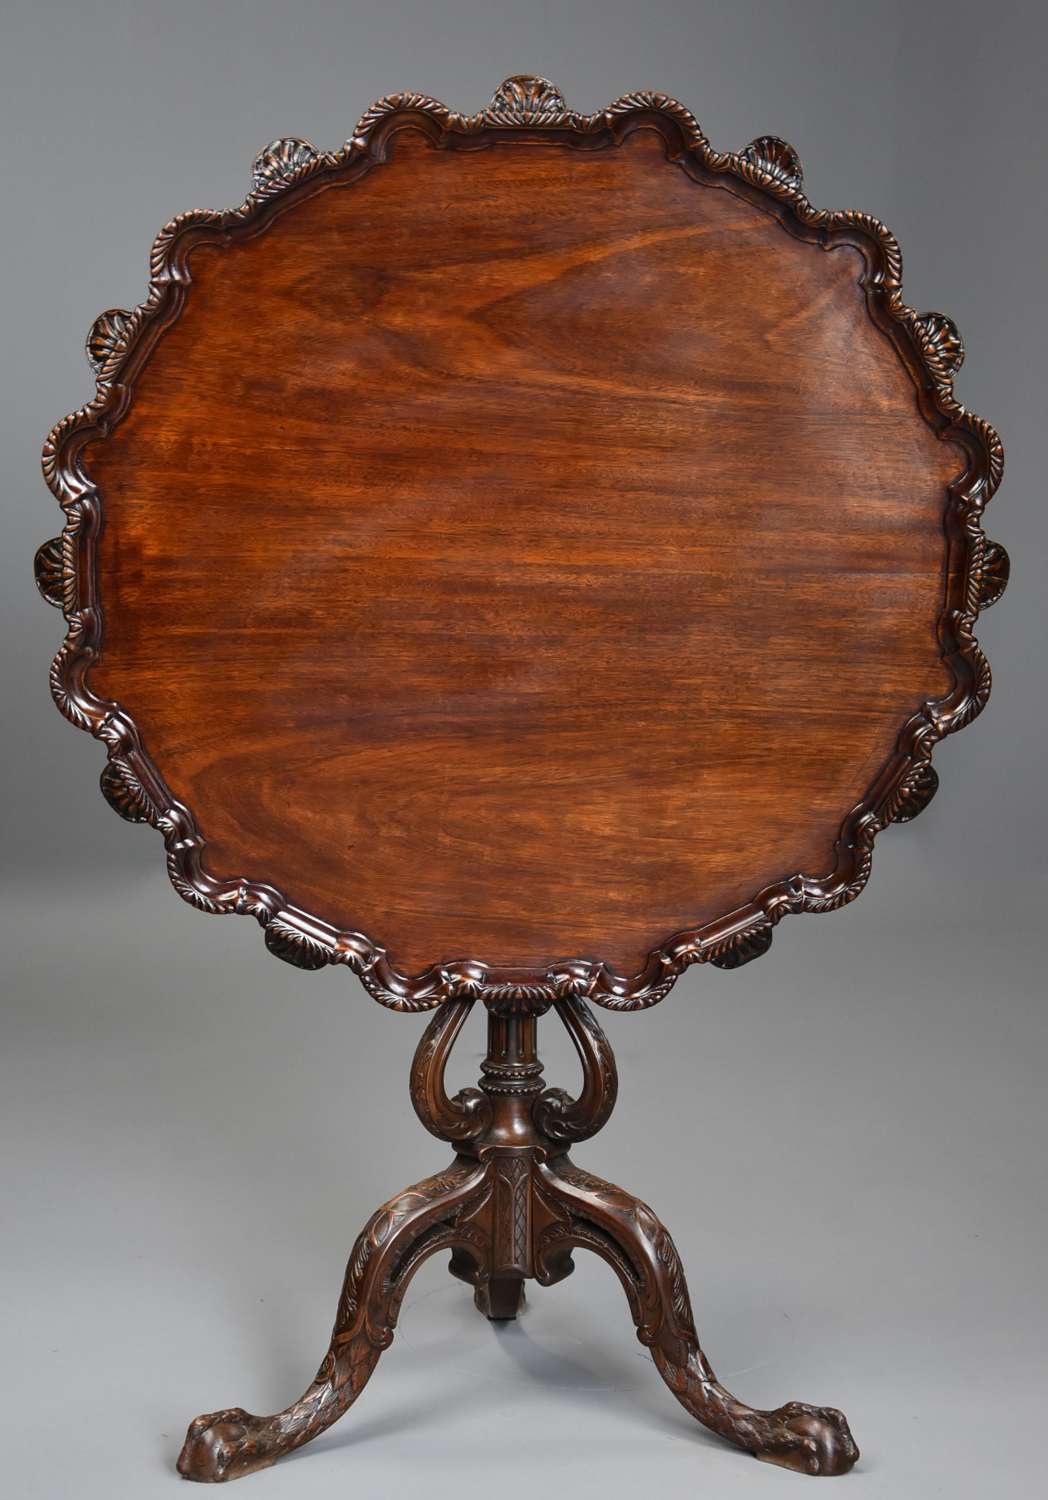 Early 20thc mahogany tilt top tripod table in the Chippendale style